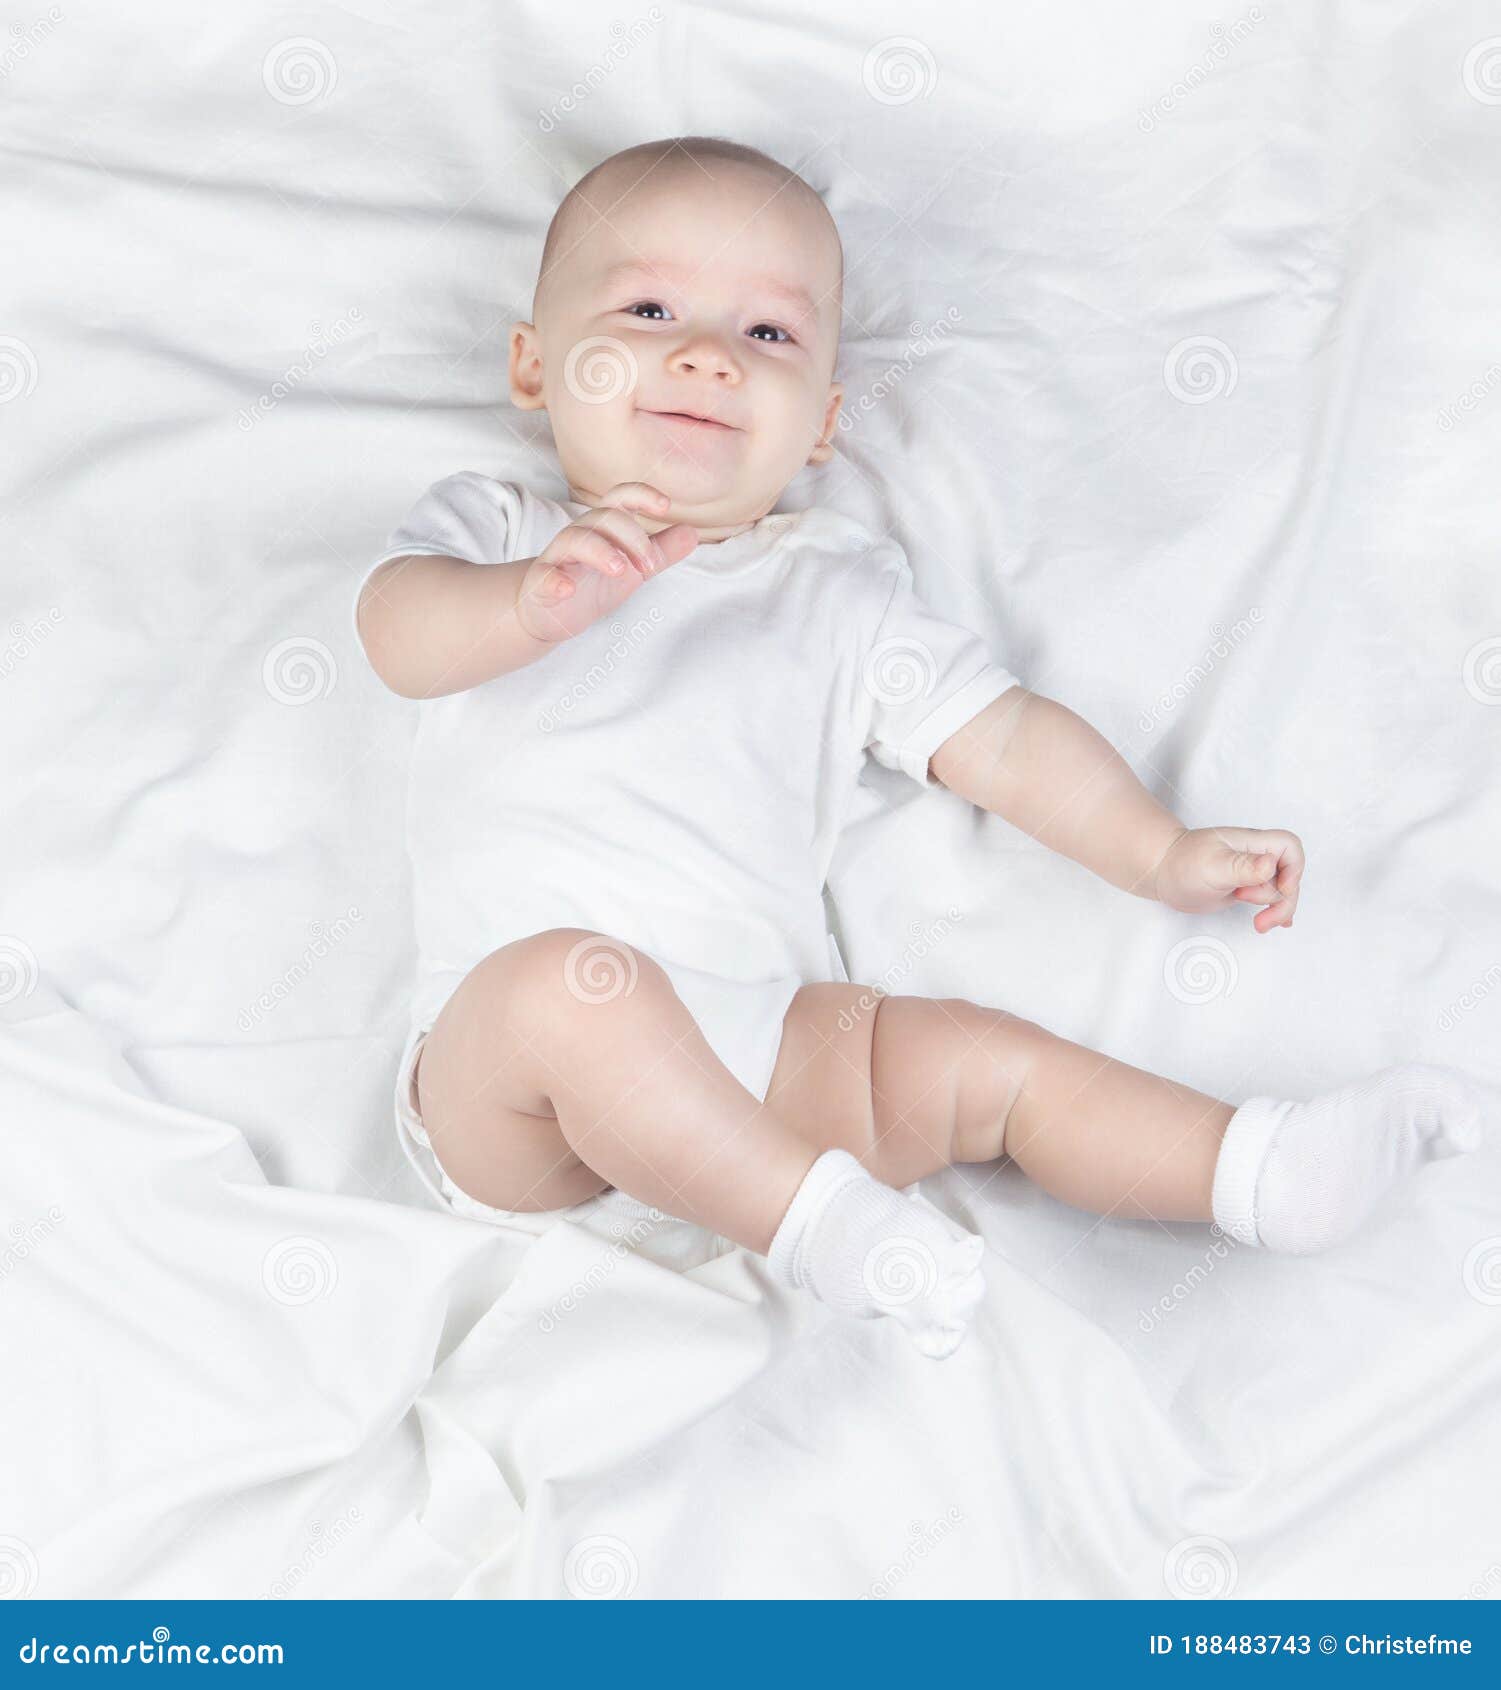 Picture of a Six Month Old Baby Boy Stock Image - Image of little ...